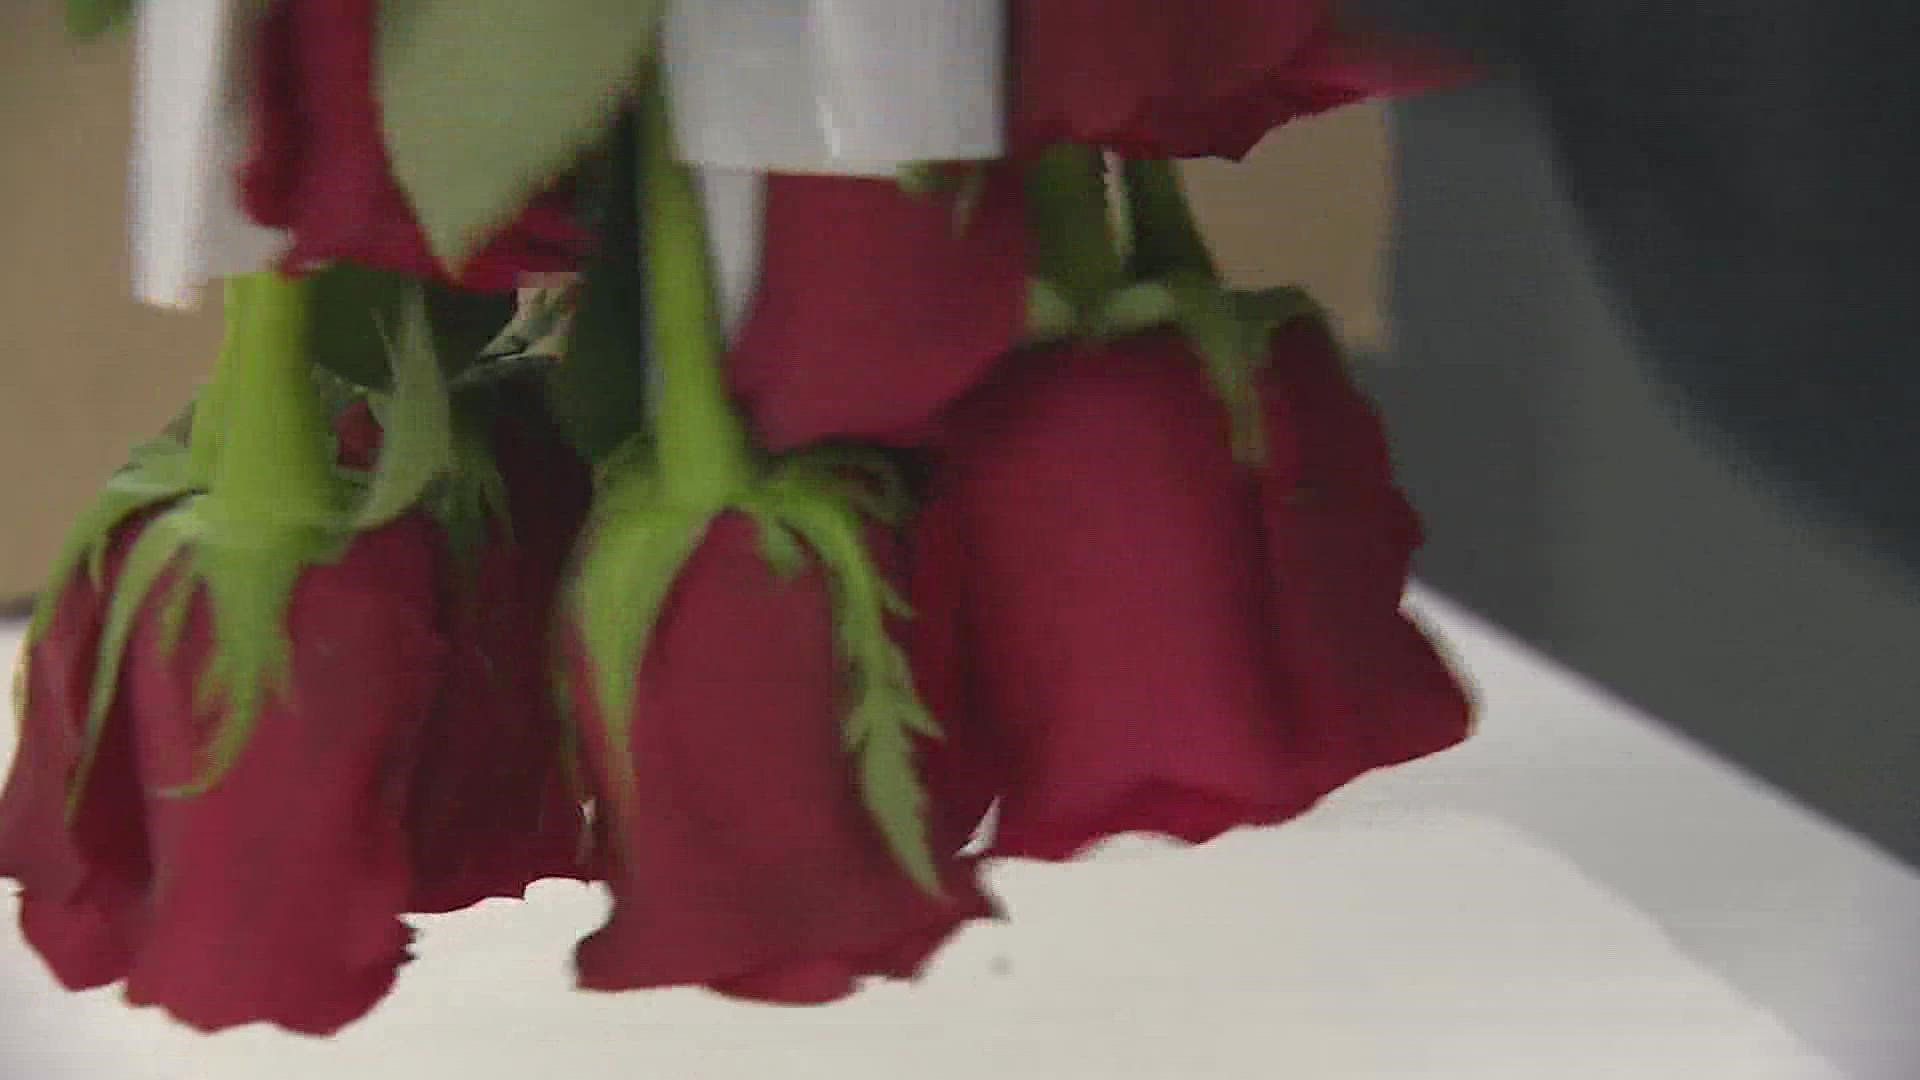 It's a busy week for customs agents at the airport where roses and other flowers are coming in from Ecuador, Colombia & Costa Rica just in time for Valentine's Day.